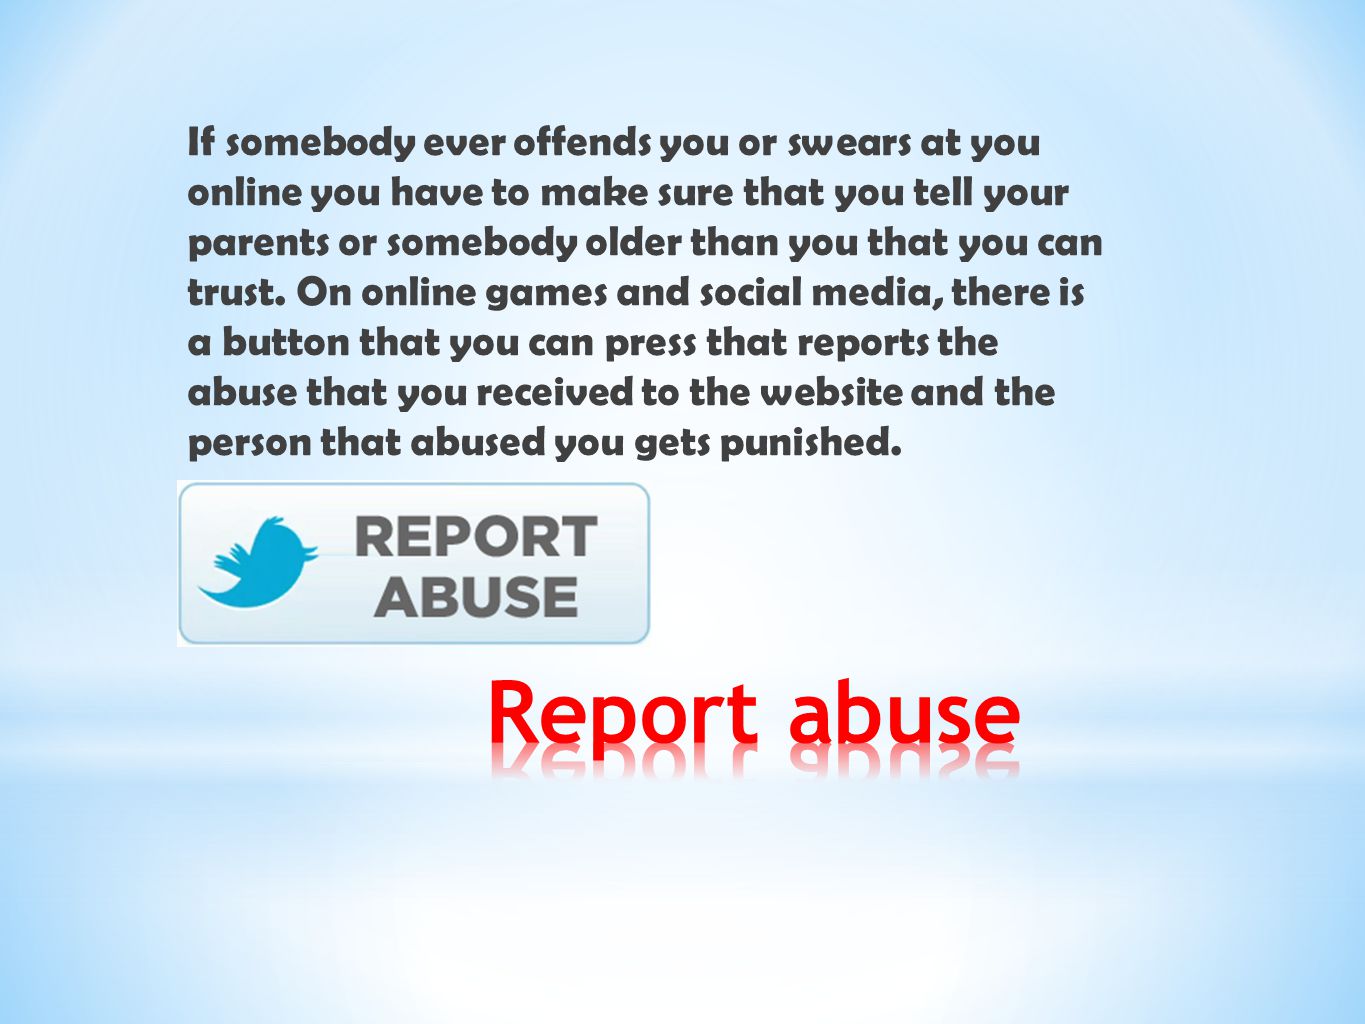 If somebody ever offends you or swears at you online you have to make sure that you tell your parents or somebody older than you that you can trust. On online games and social media, there is a button that you can press that reports the abuse that you received to the website and the person that abused you gets punished.